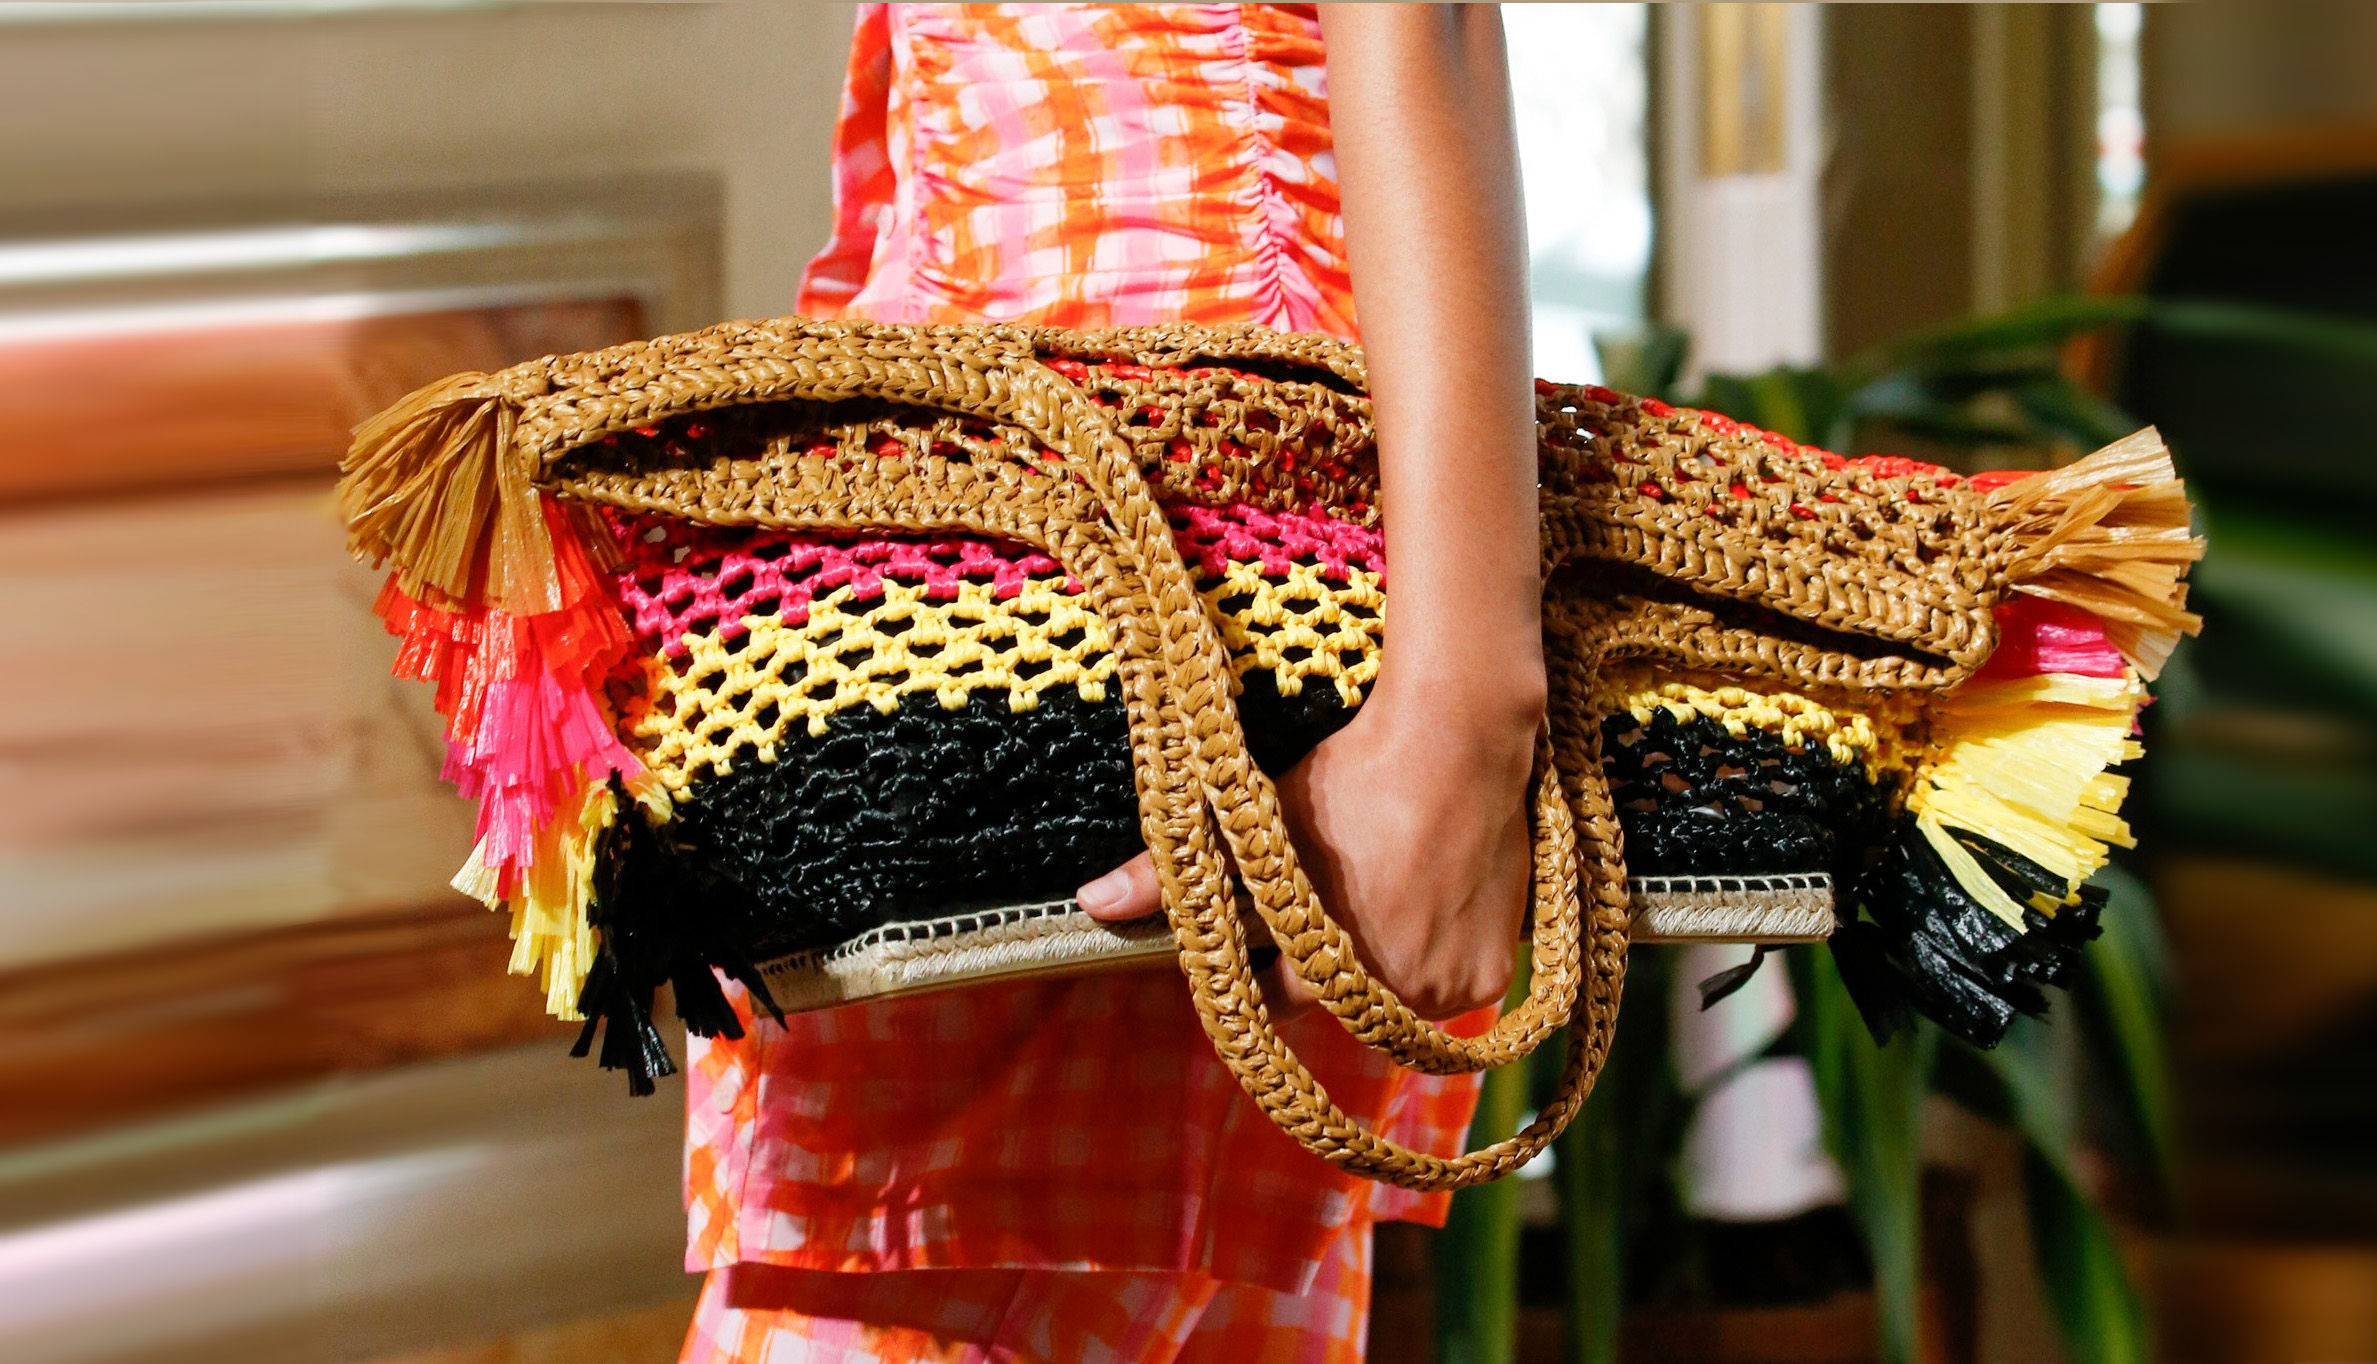 10 crochet bags to nail that beachy summer look